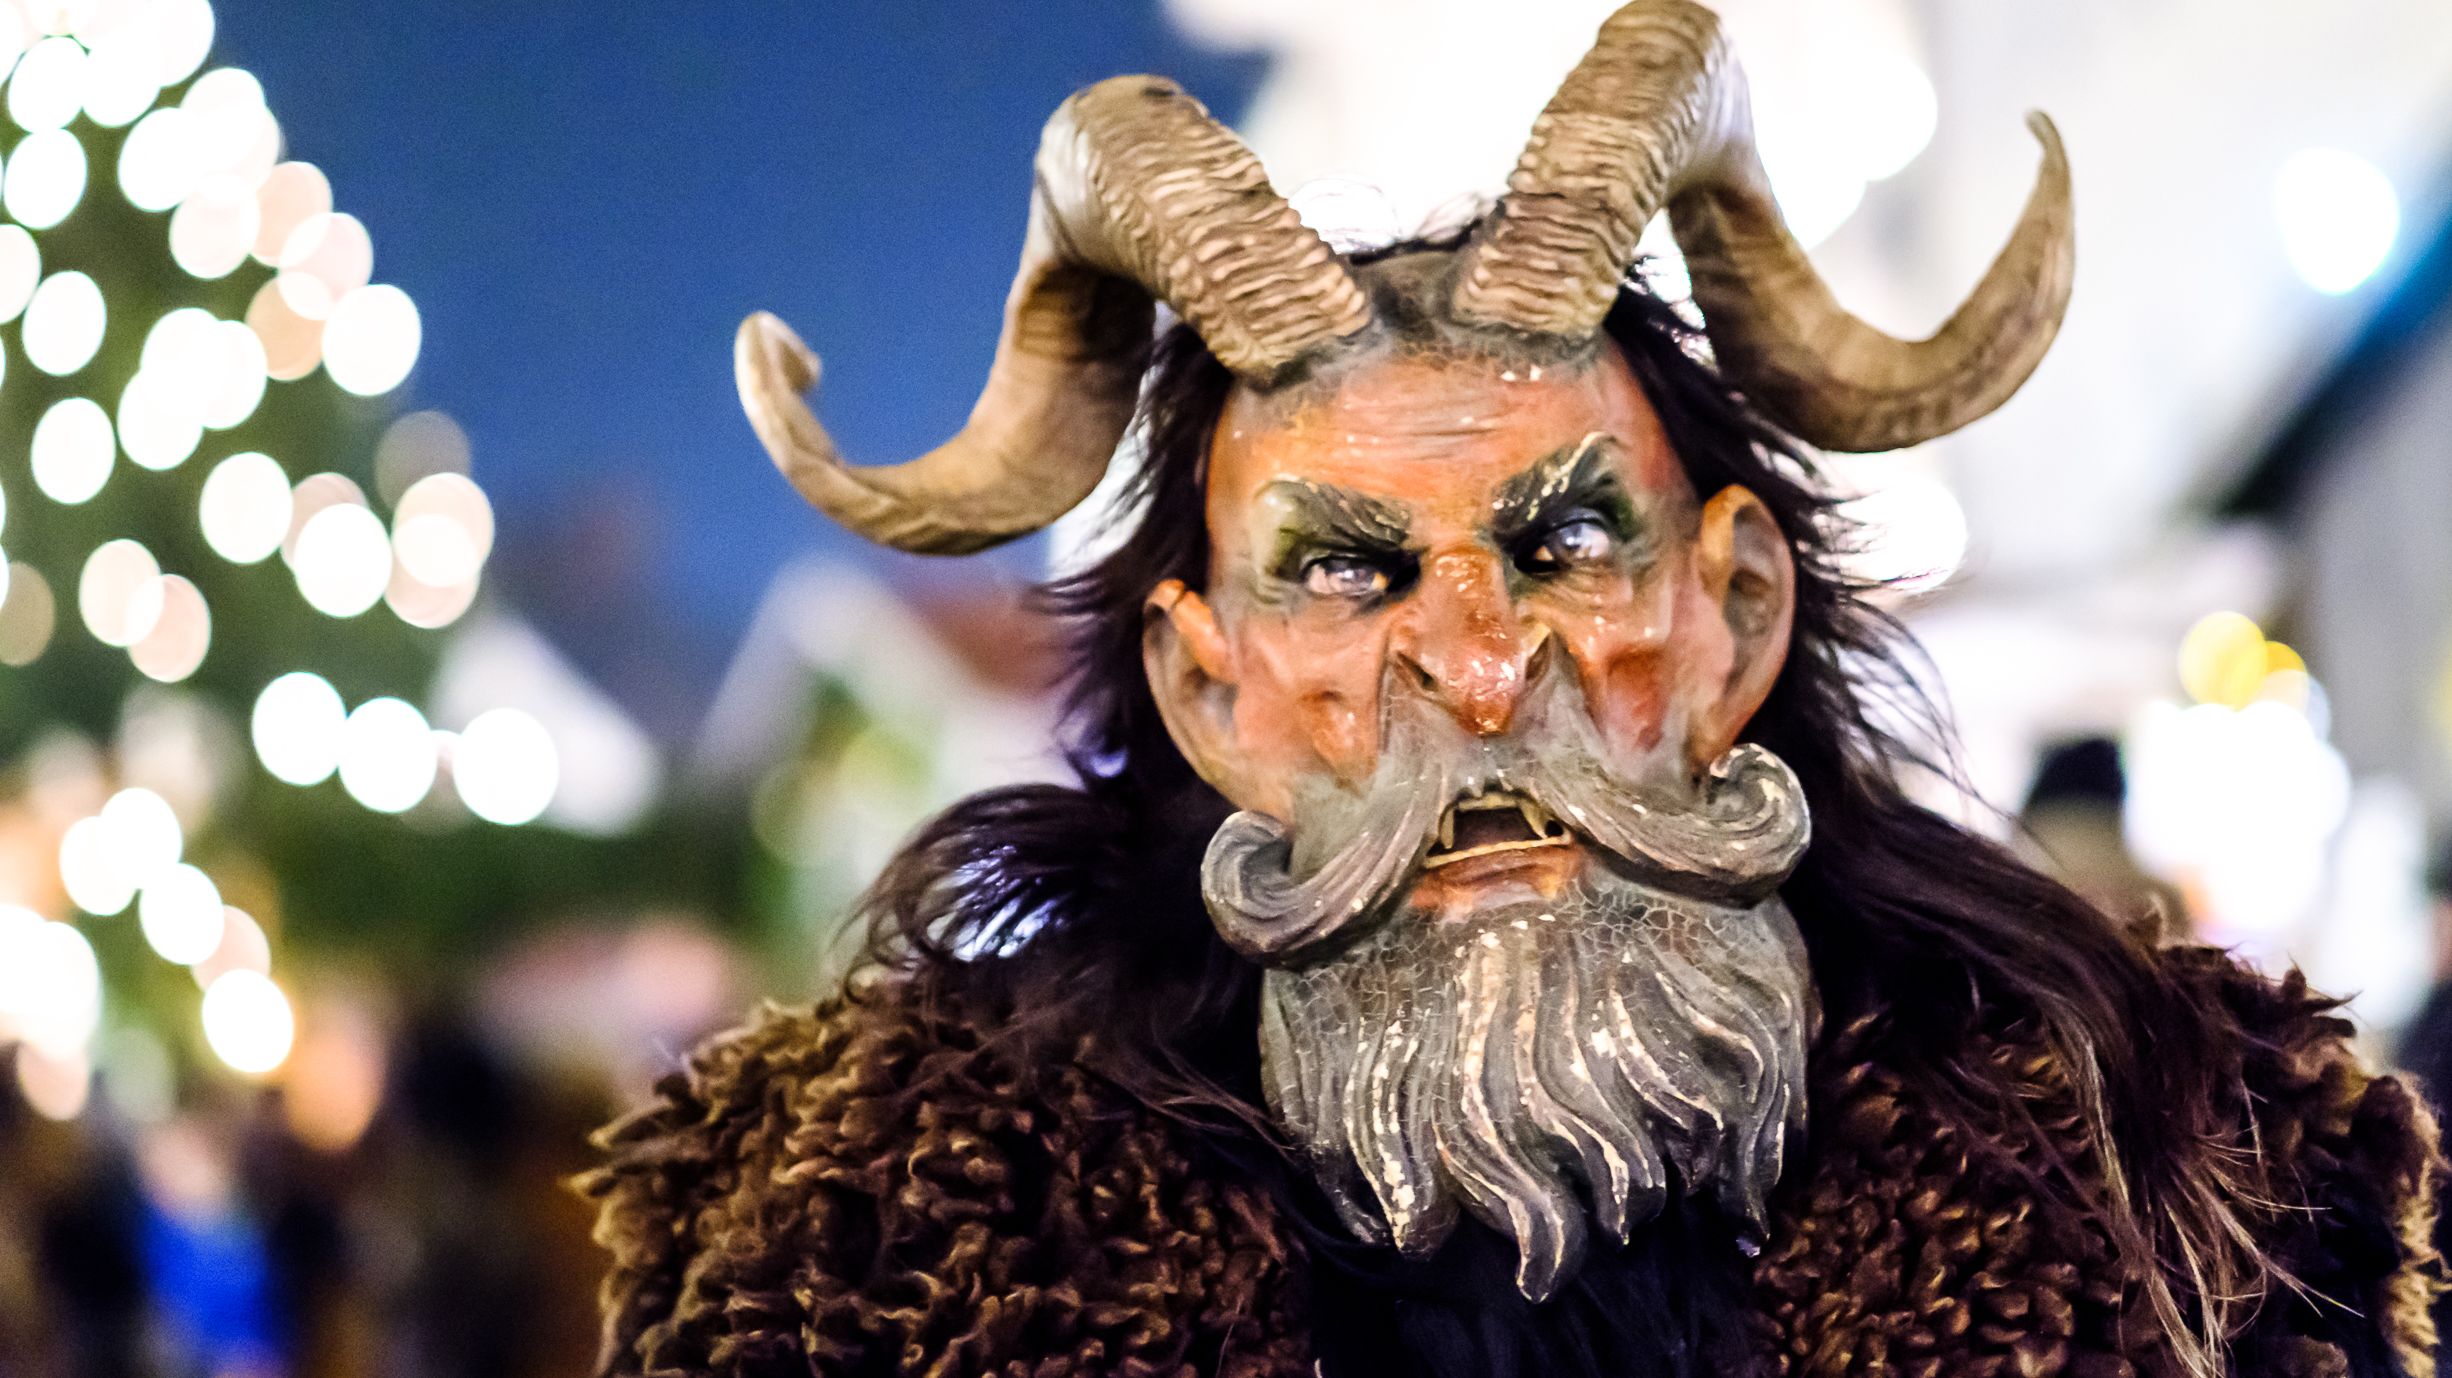 Which Legendary Christmas Monster Are You? | Mental Floss